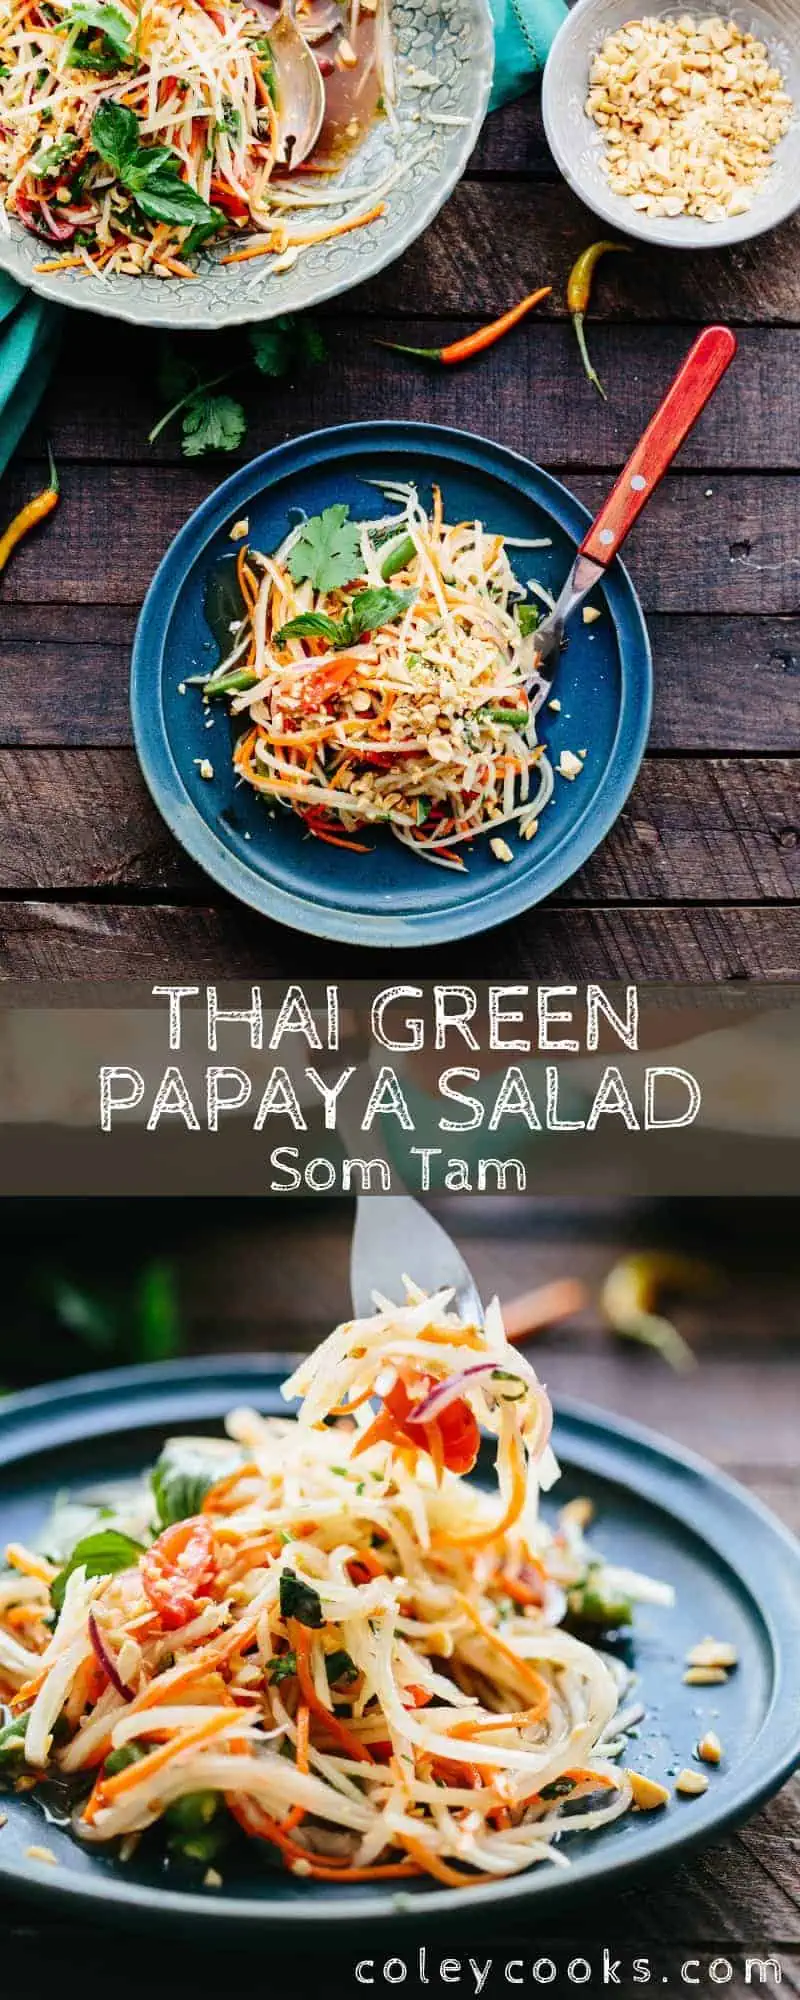 Pinterest collage of shredded Thai green papaya salad both on a plate and a bite on a fork.